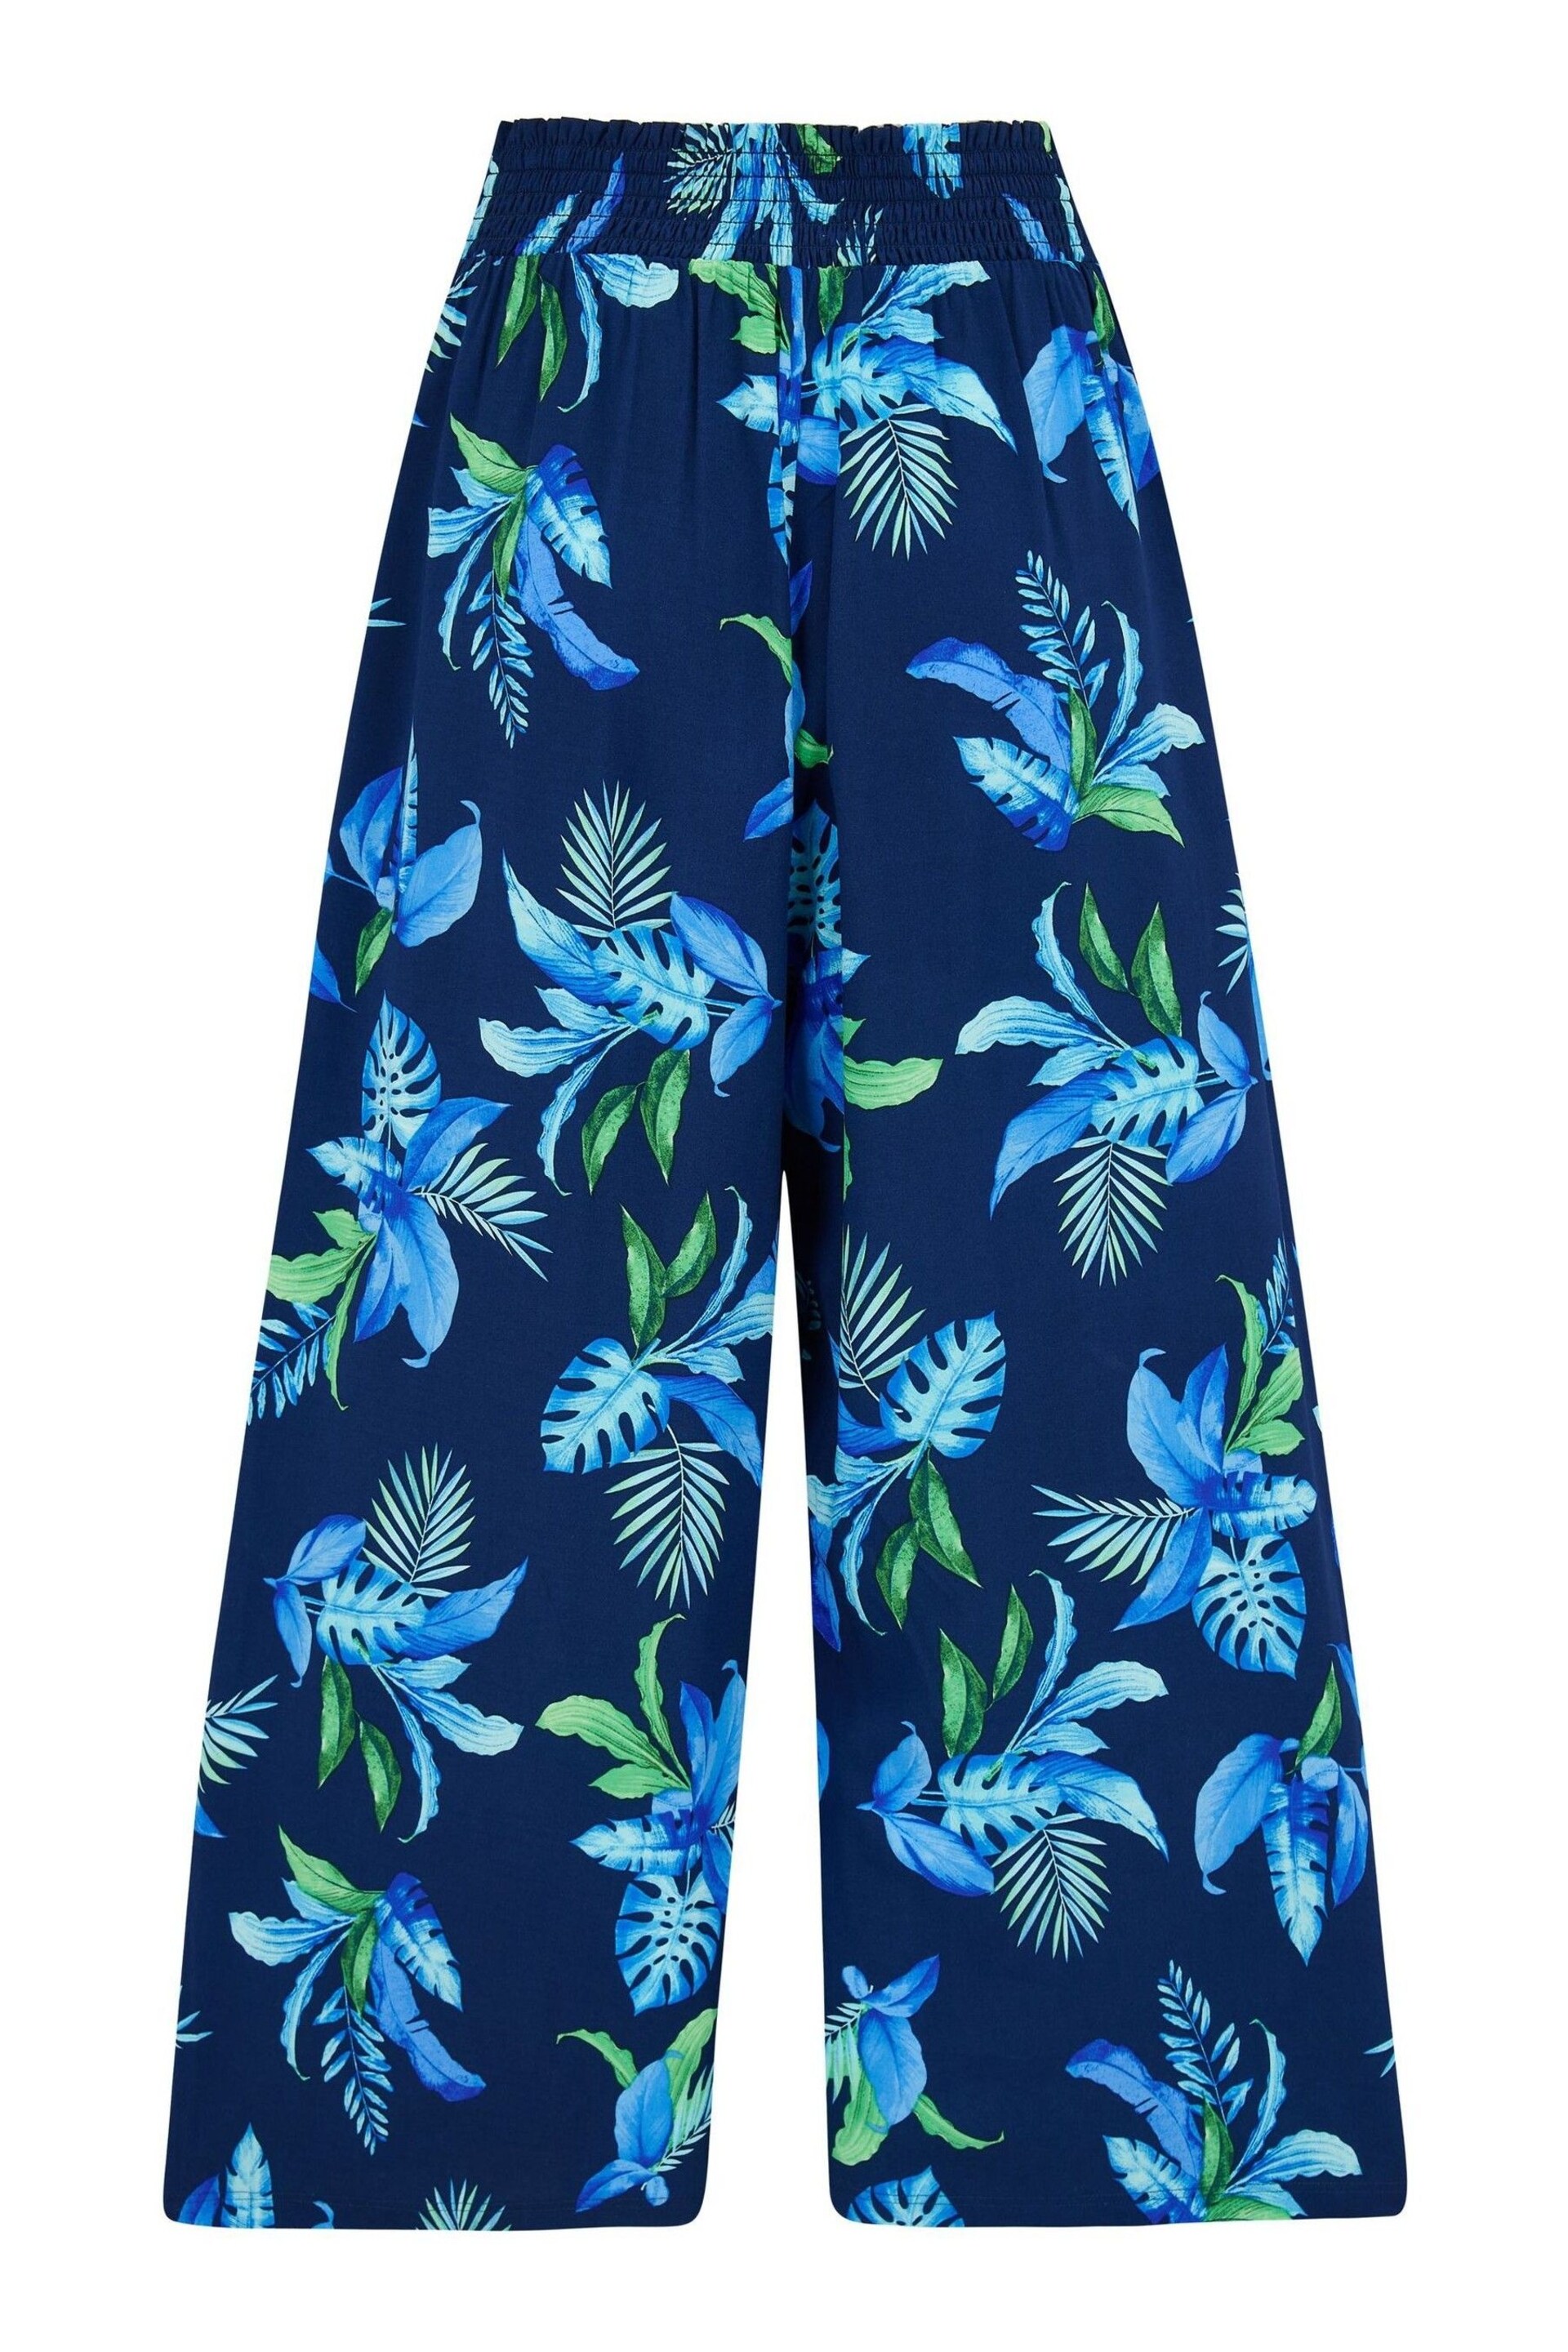 Pour Moi Blue LENZING™ ECOVERO™ Viscose Cropped Beach Trousers - Image 4 of 4